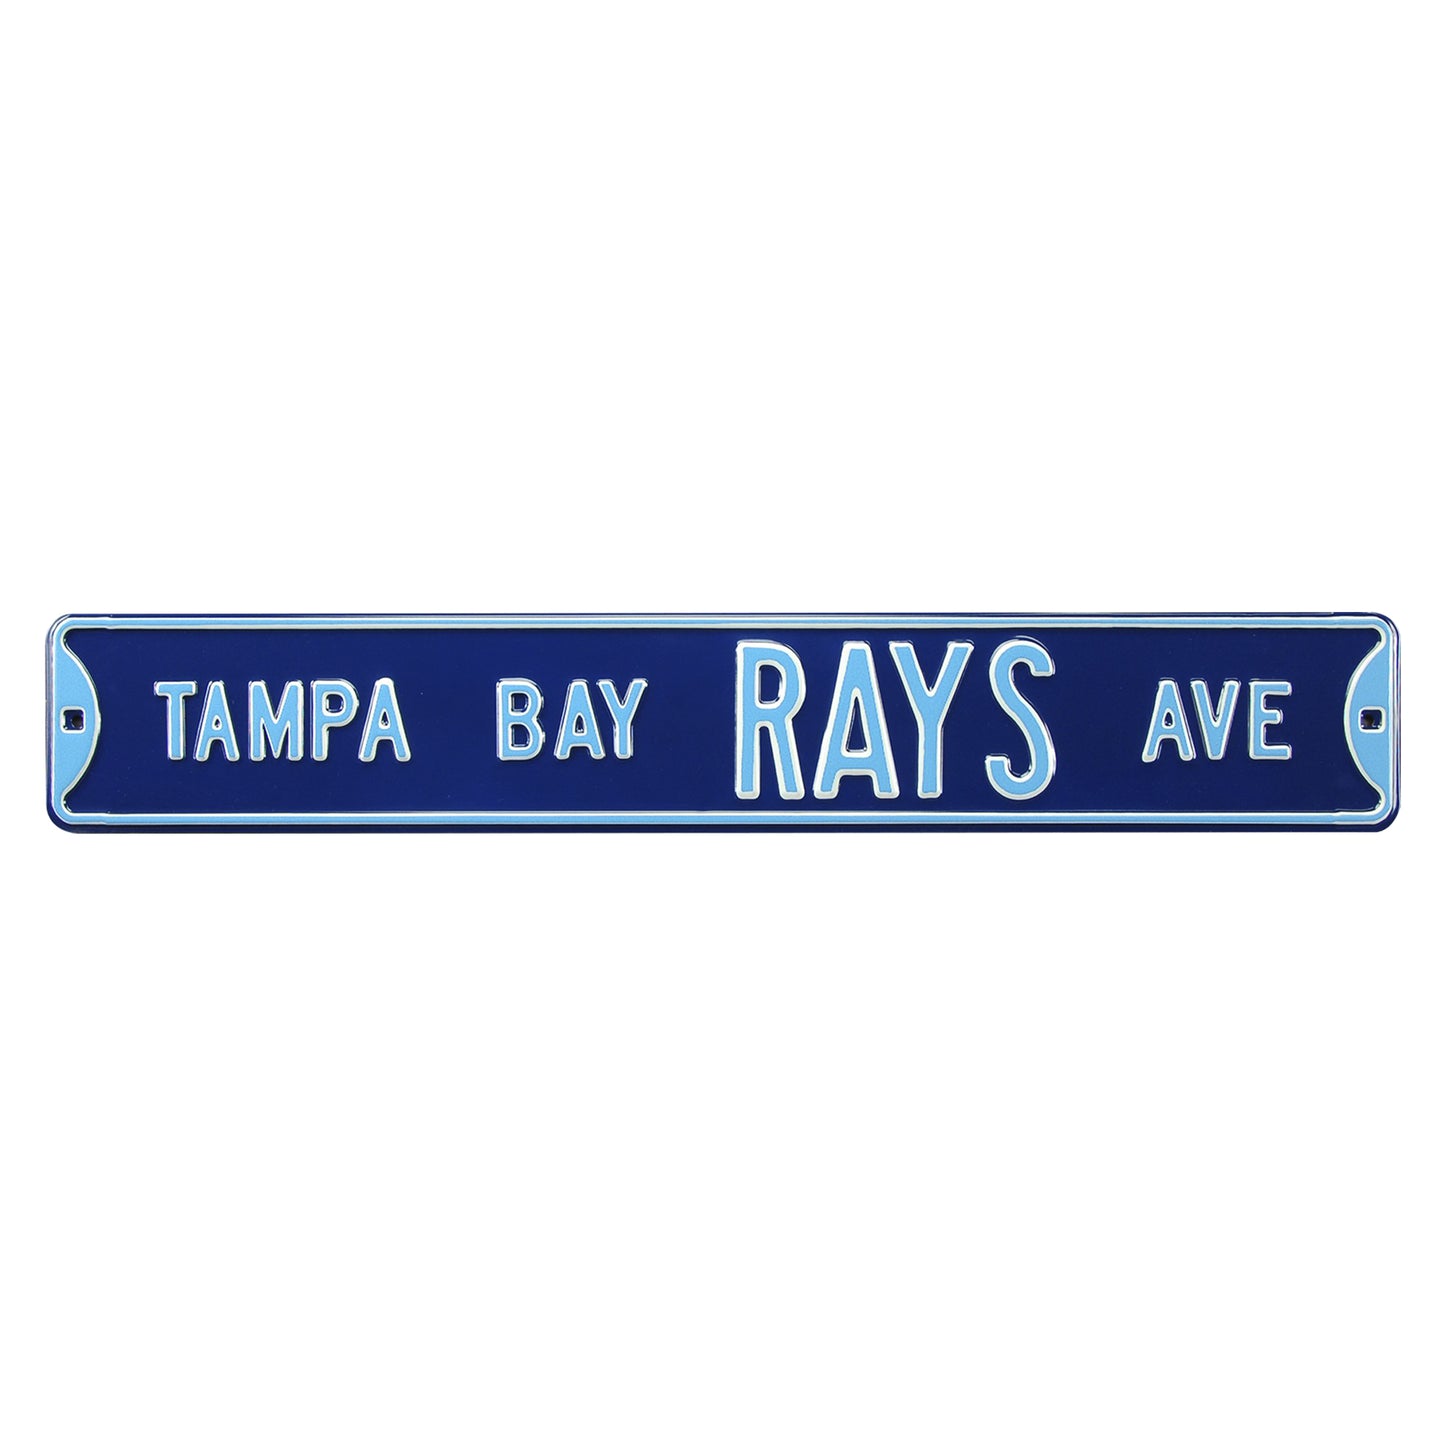 Tampa Bay Rays Steel Street Sign-TAMPA BAY RAYS AVE